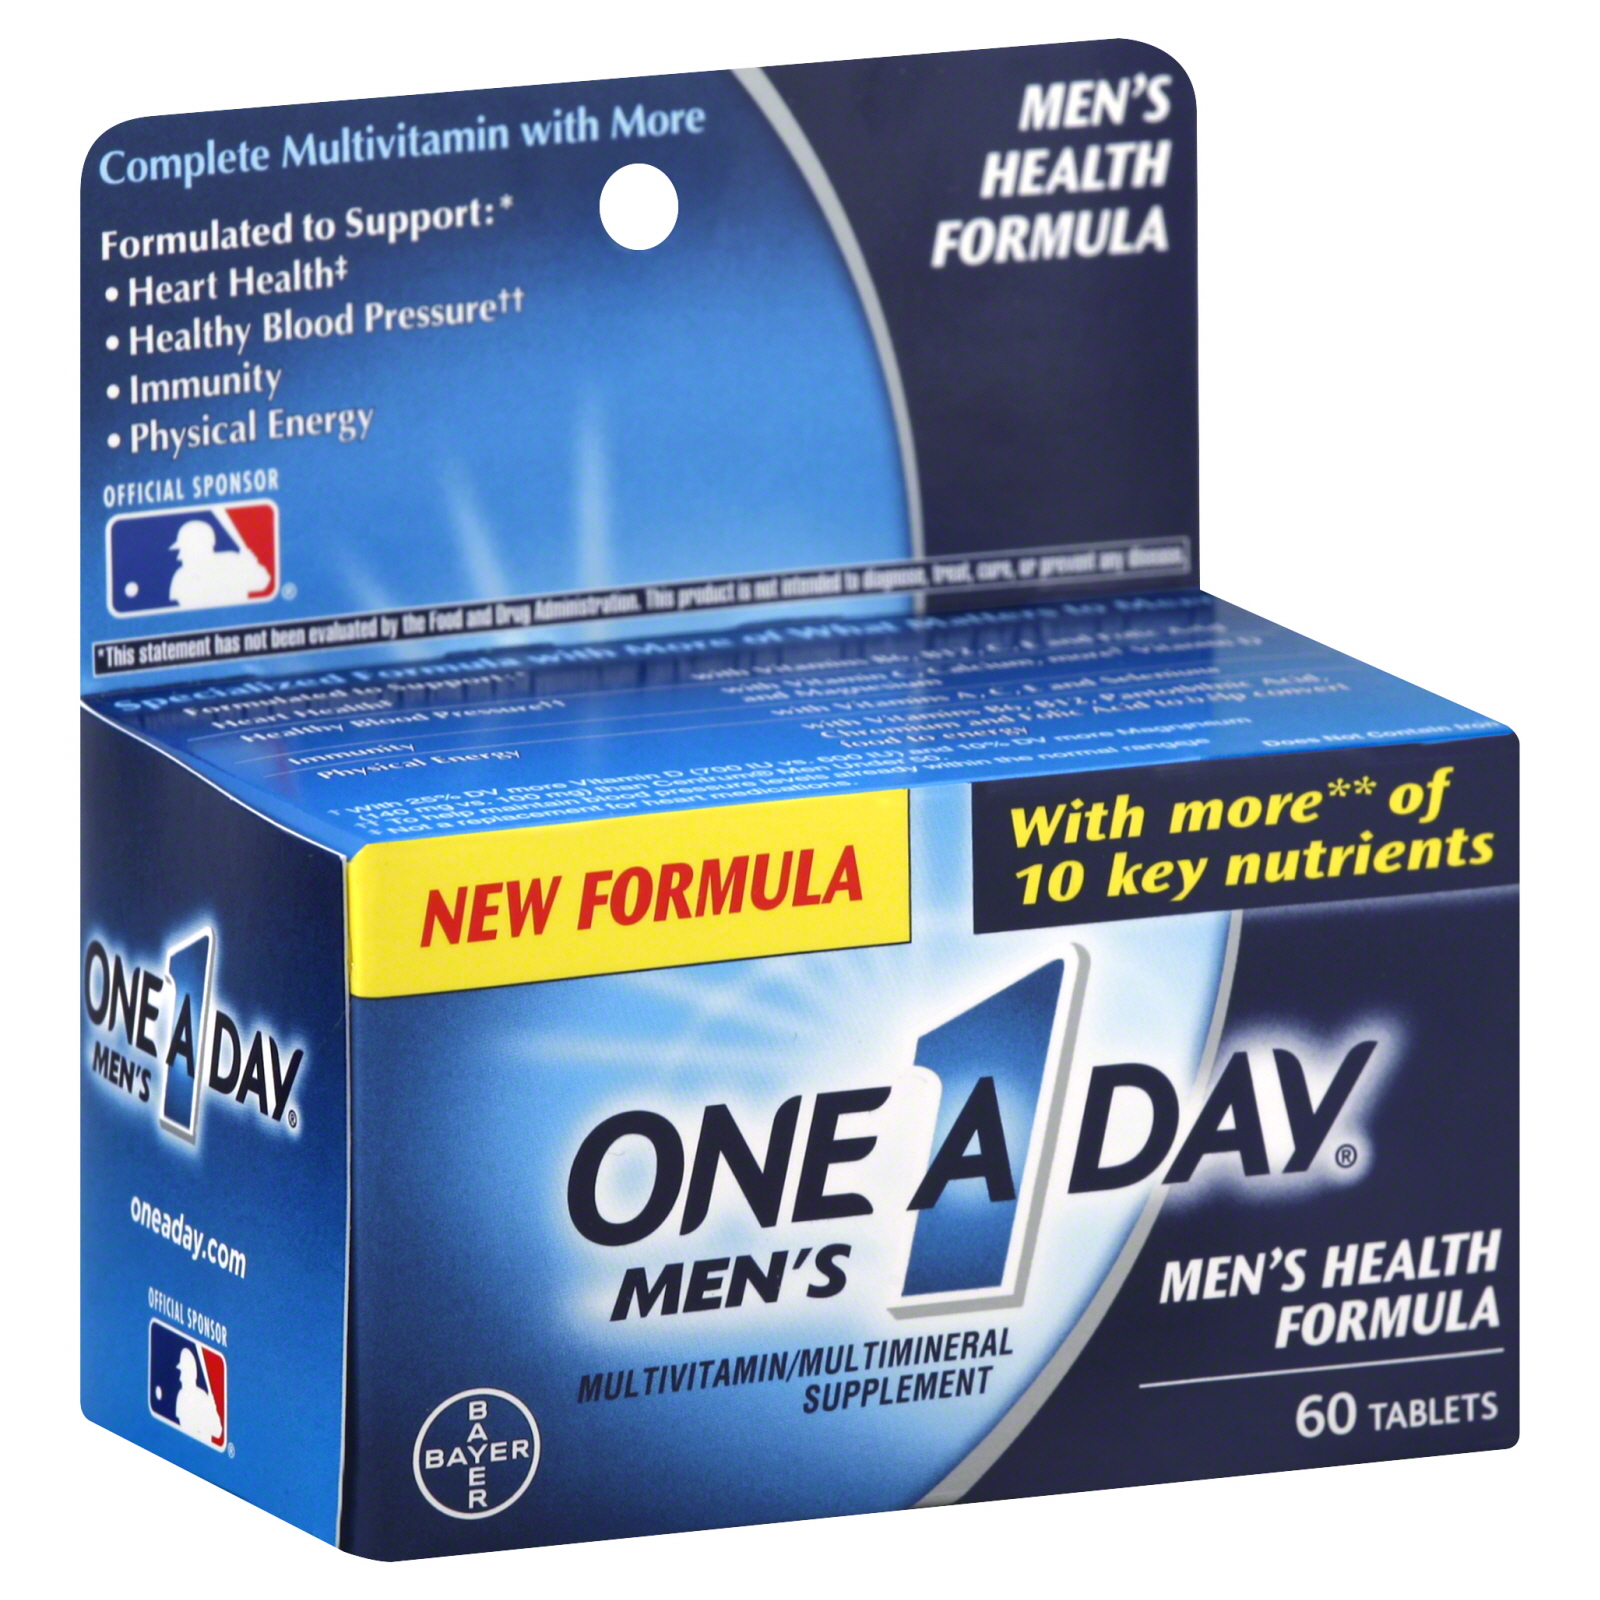 ONE A DAY  Men's High Potency Multivitamin/Multimineral Supplement, Tablets, 60 tablets